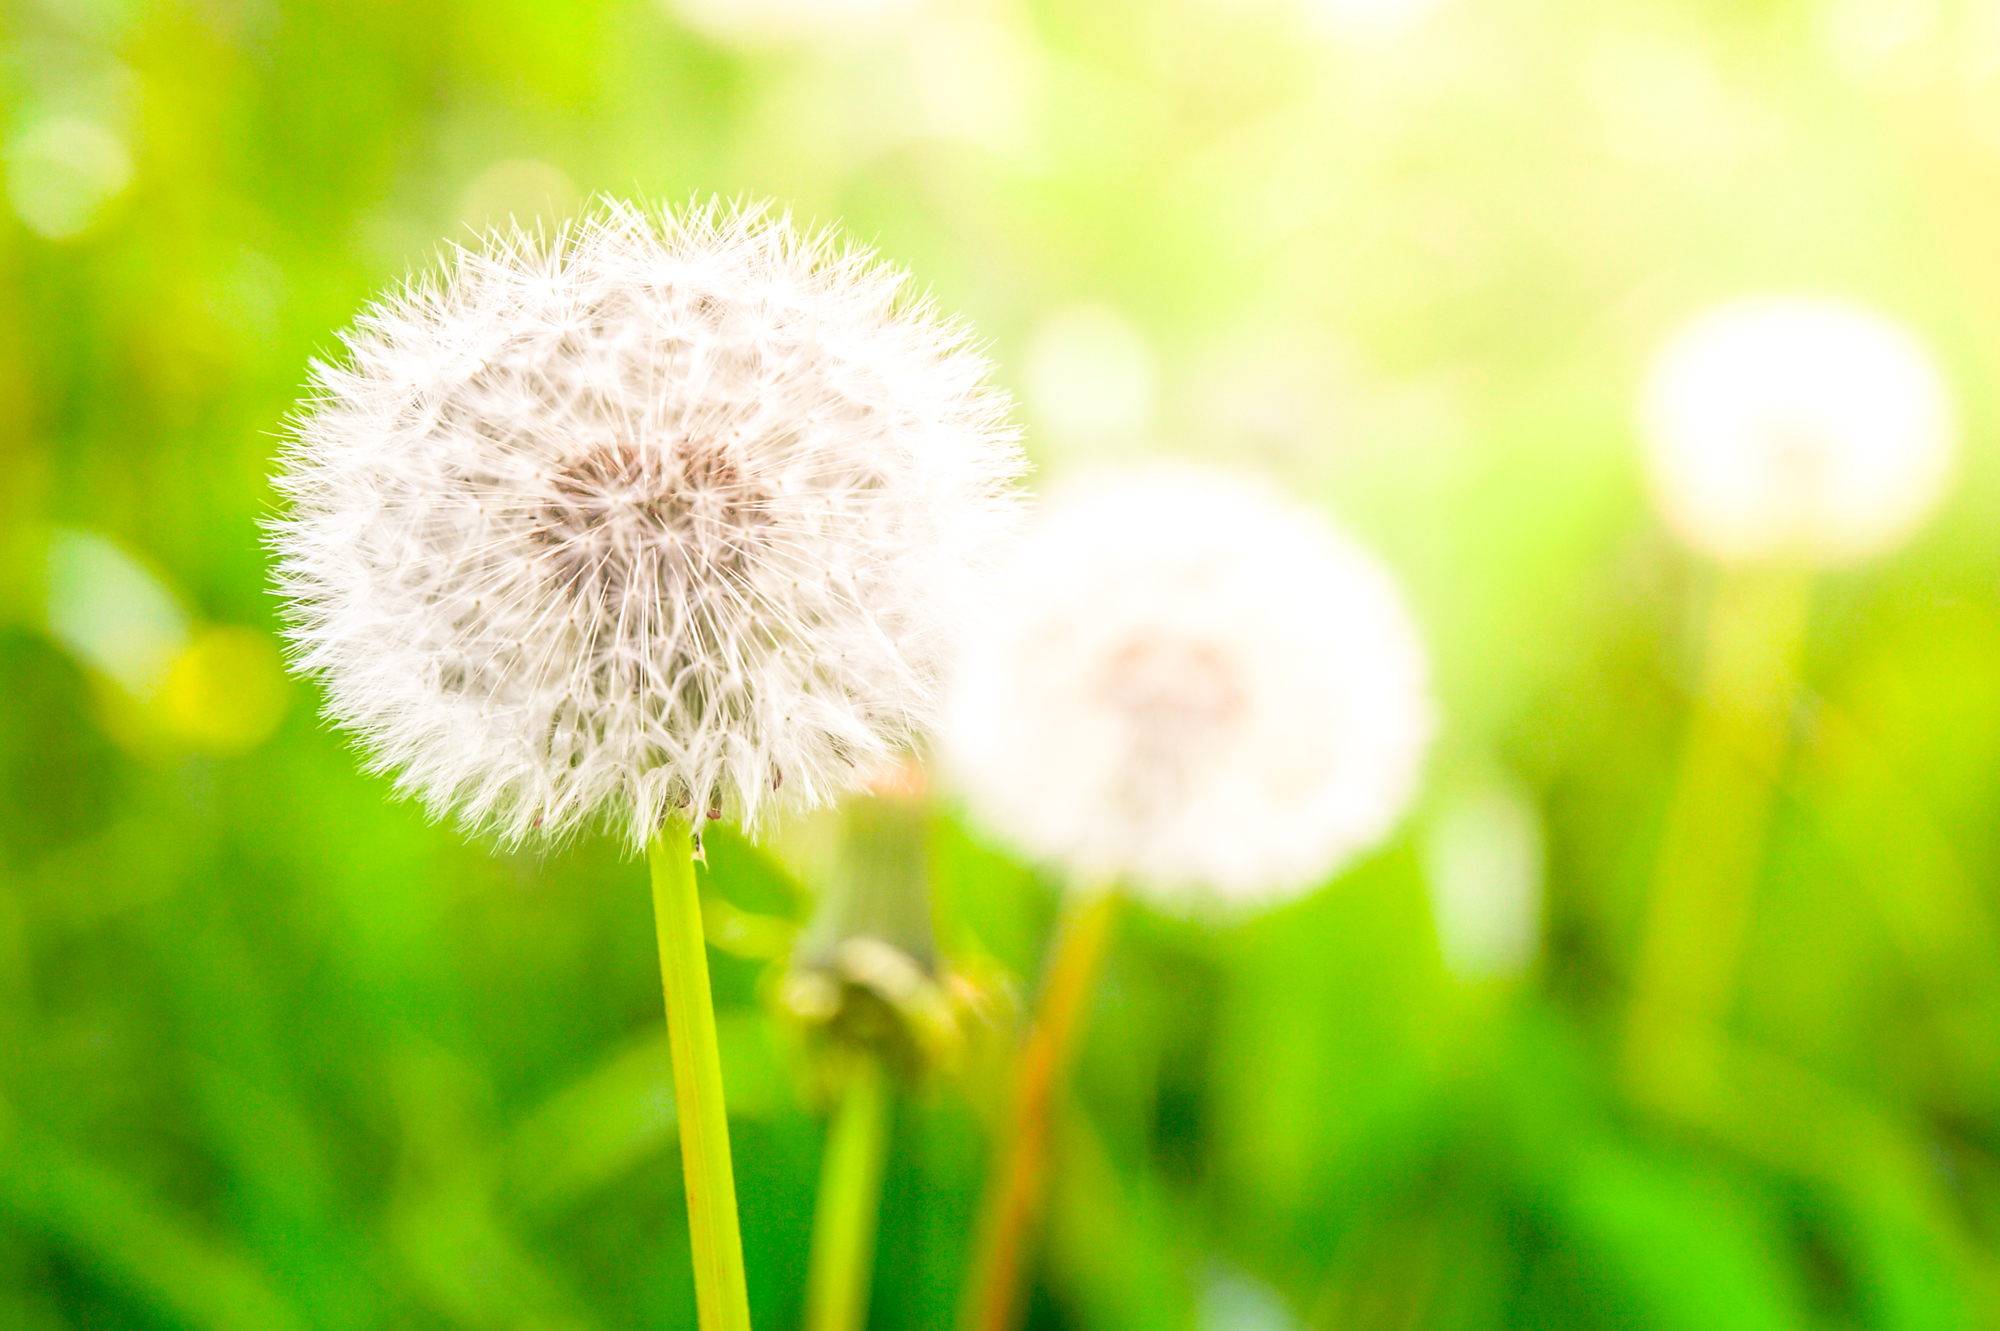 Faded dandelions with fluffy white seeds in the green meadow